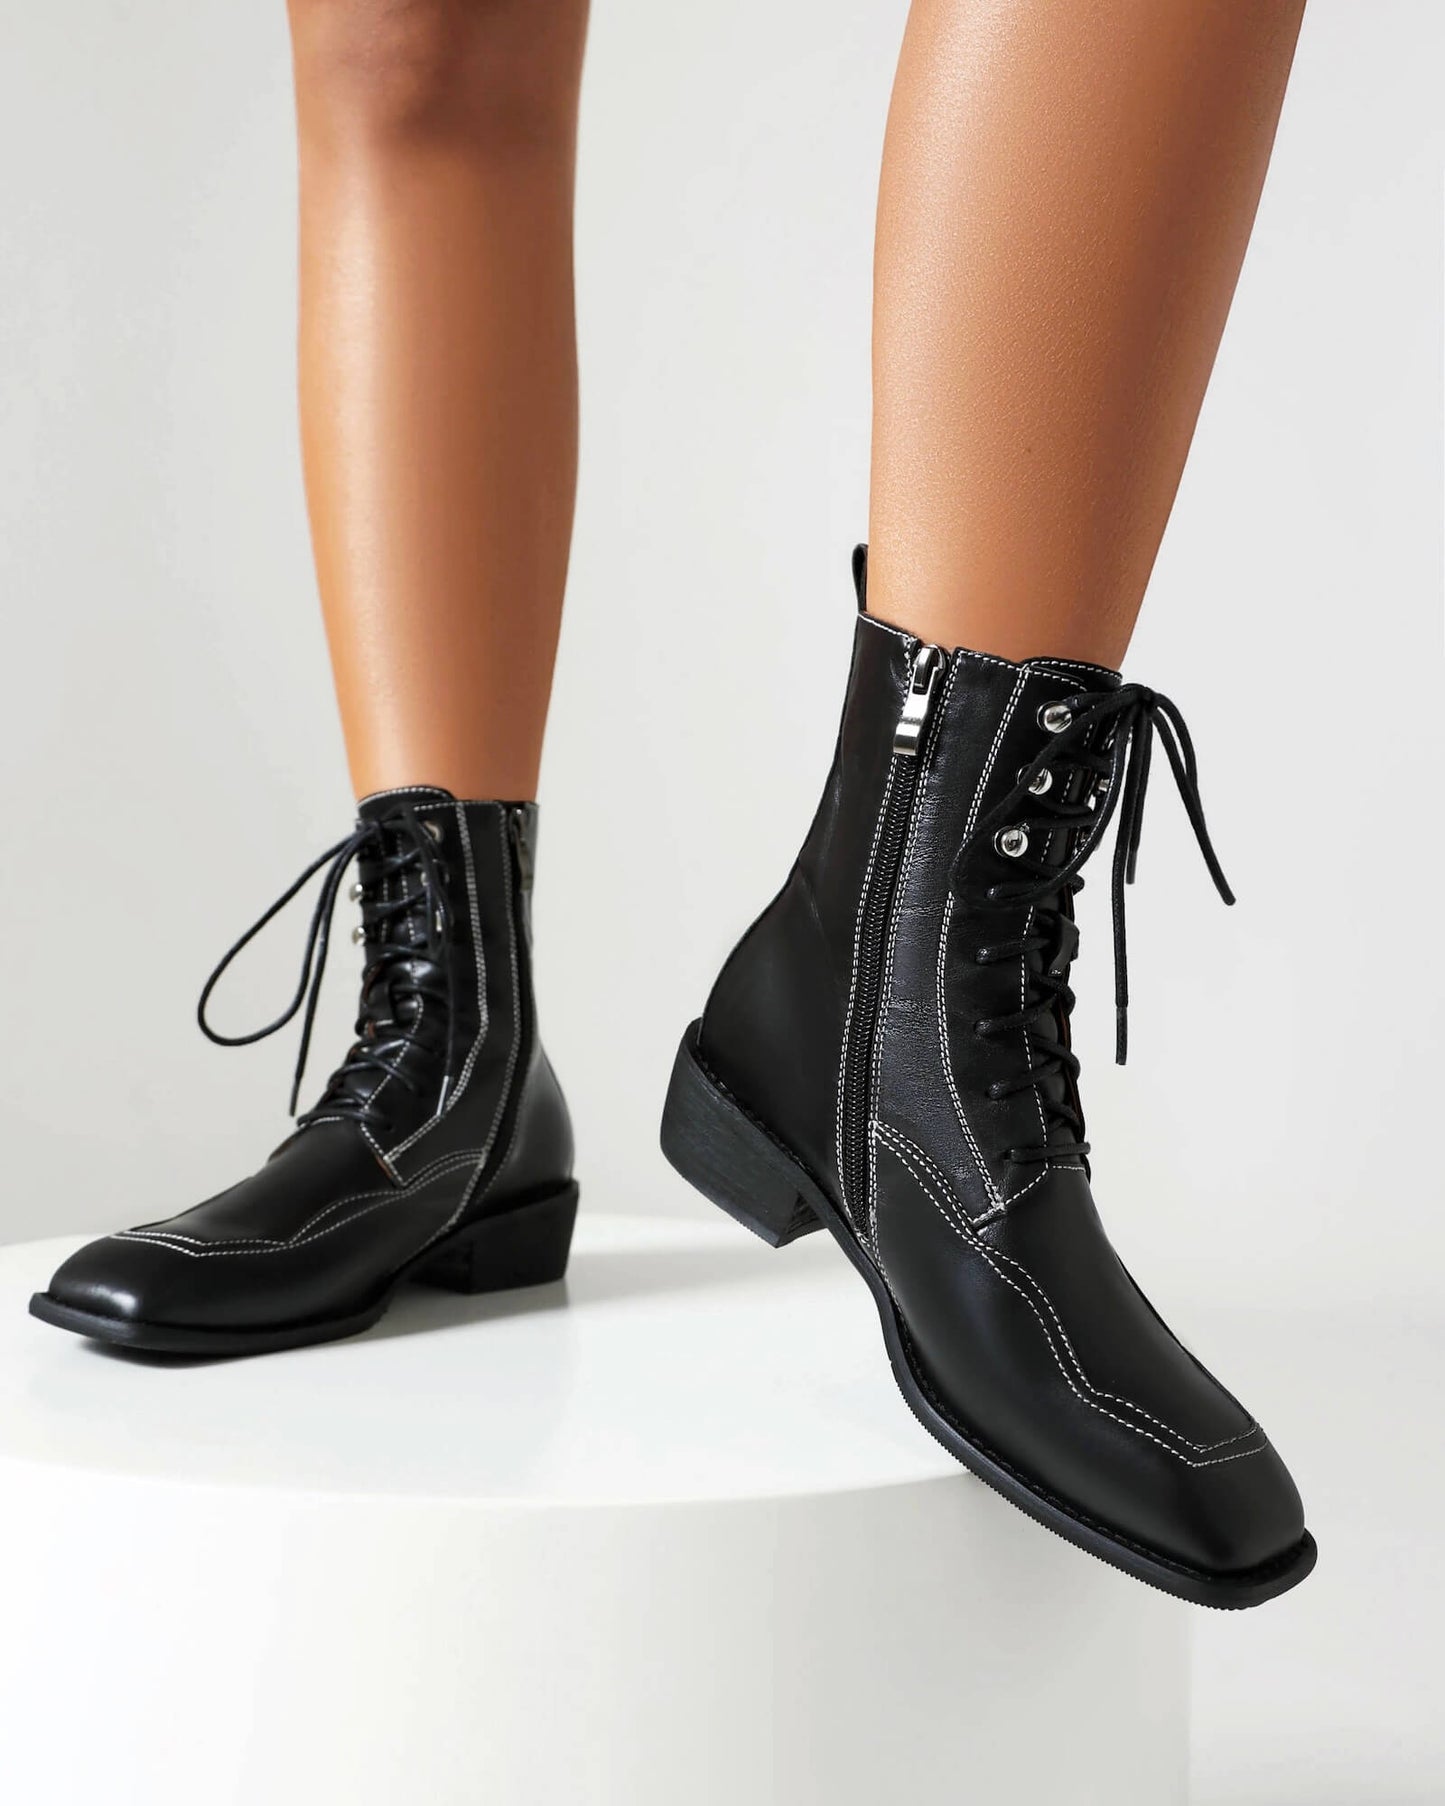 Foria-topstitching-leather-boots-model-1